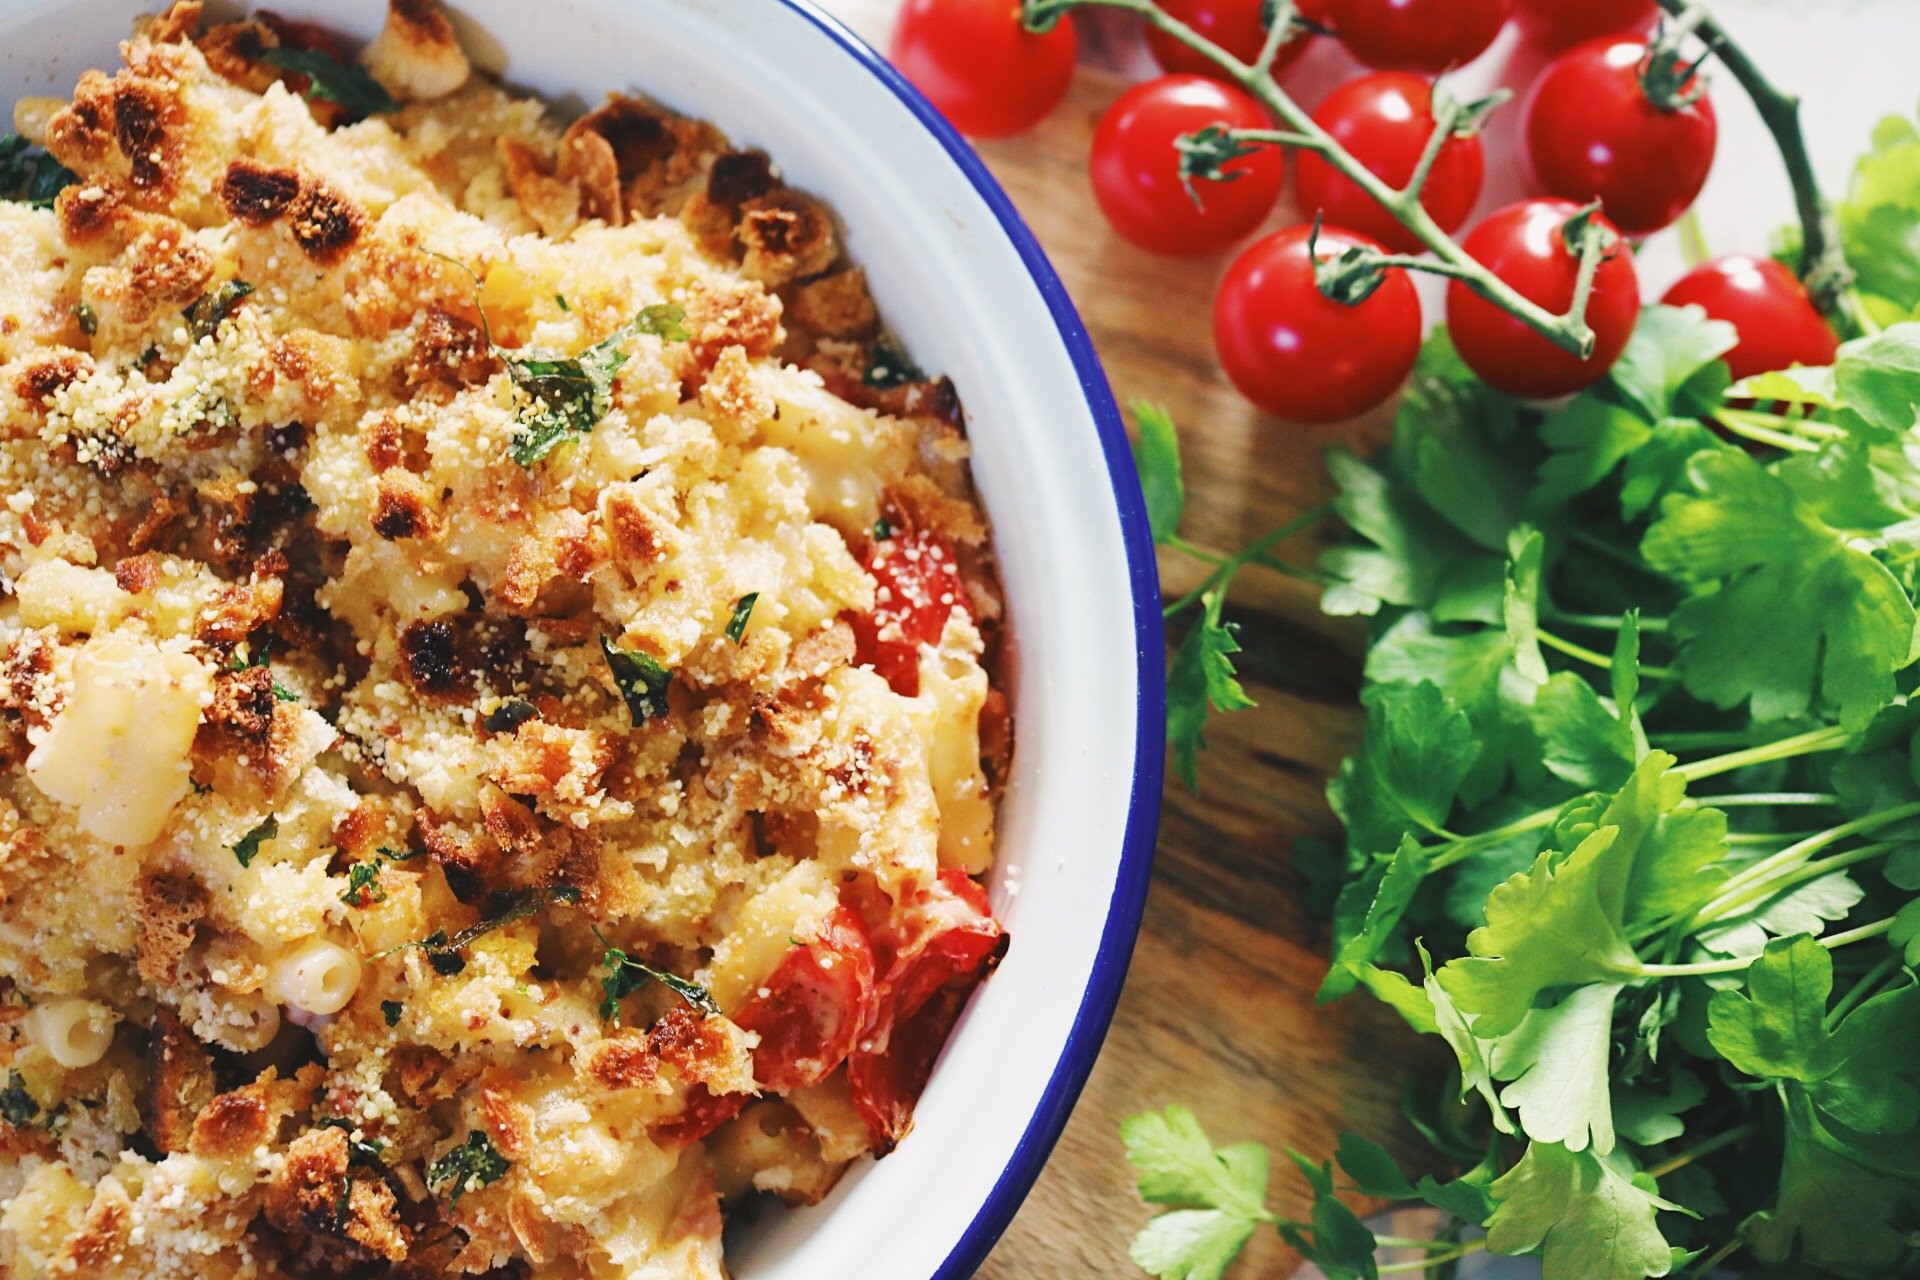 Eatlean macncheese with tomatoes and lettuce